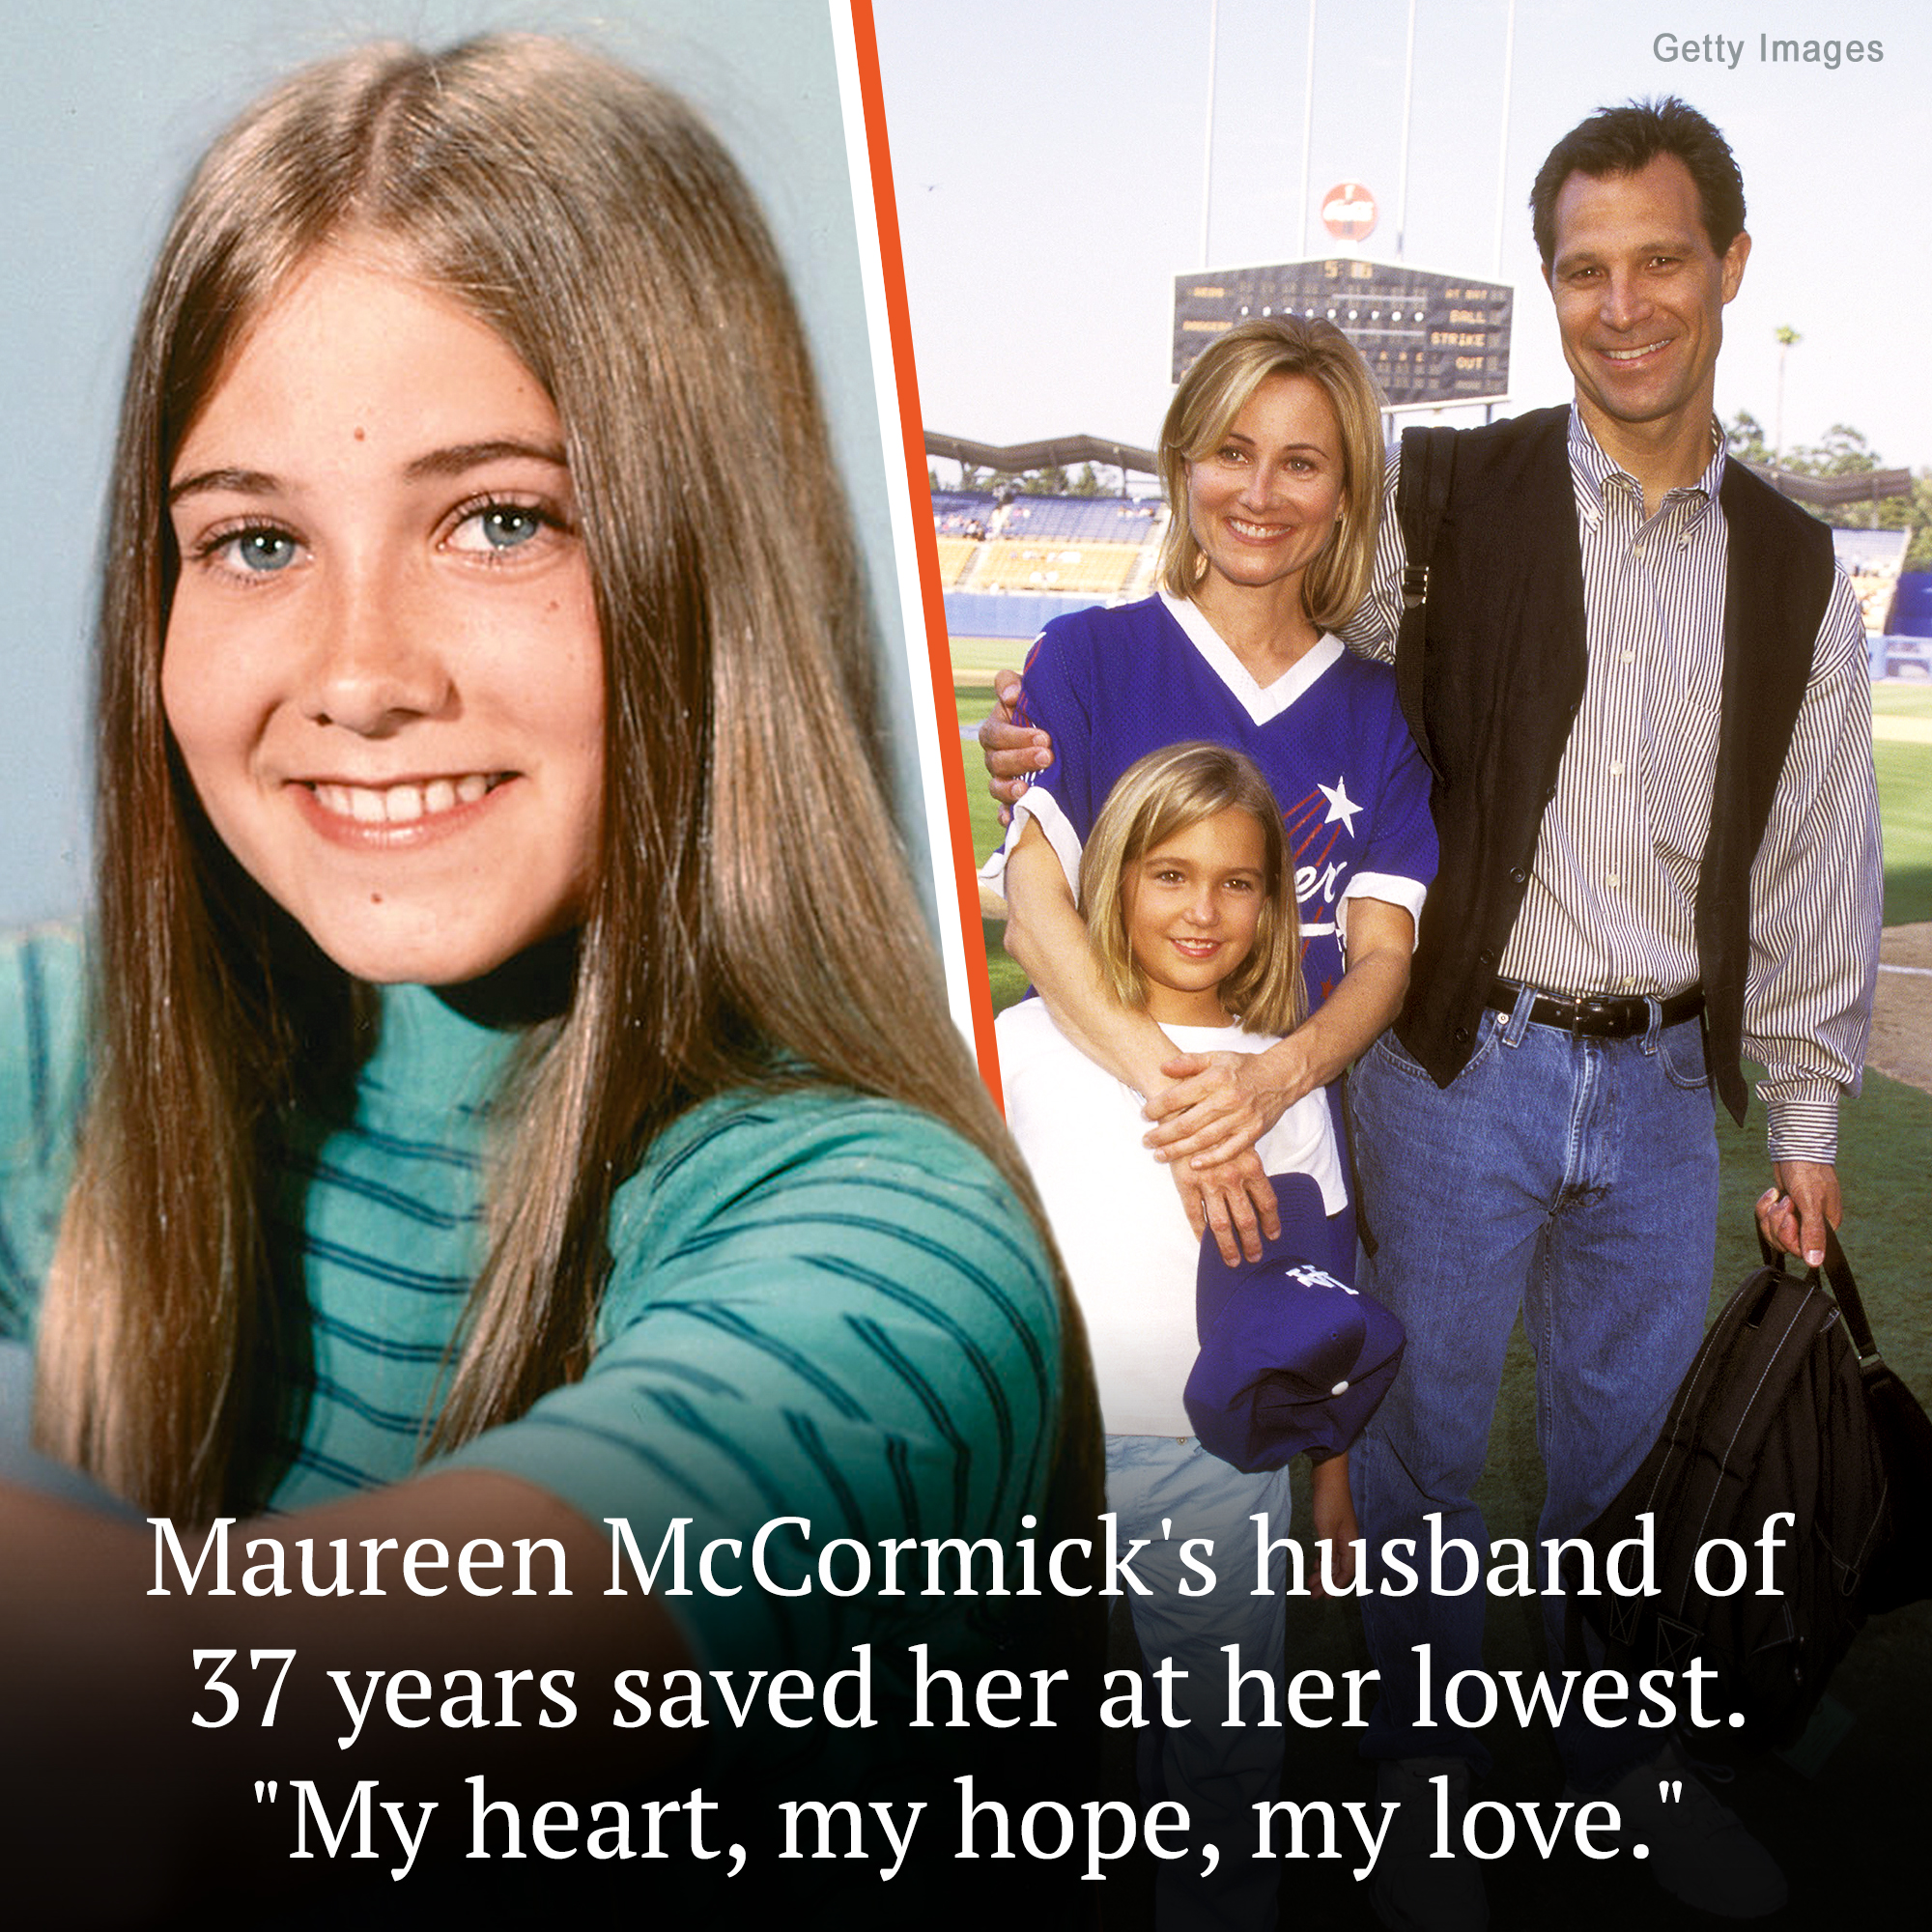 Maureen McCormick, a.k.a Marcia Brady from the hit show “The Brady Bunch,” was at the darkest times in her life after the show ended.